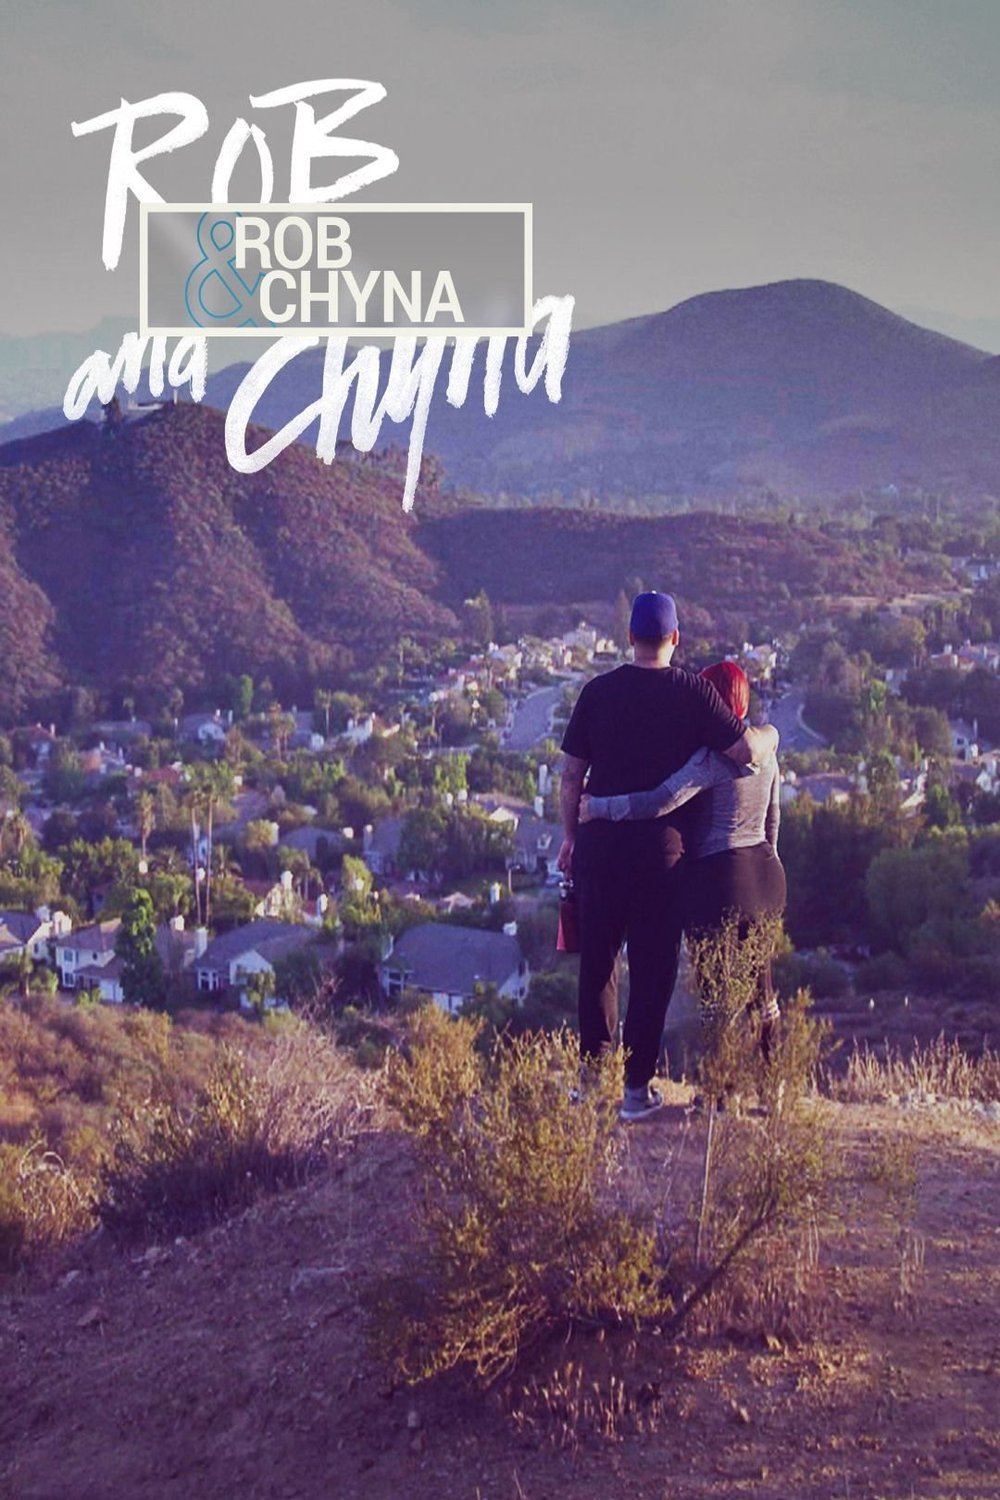 Poster of the movie Rob & Chyna